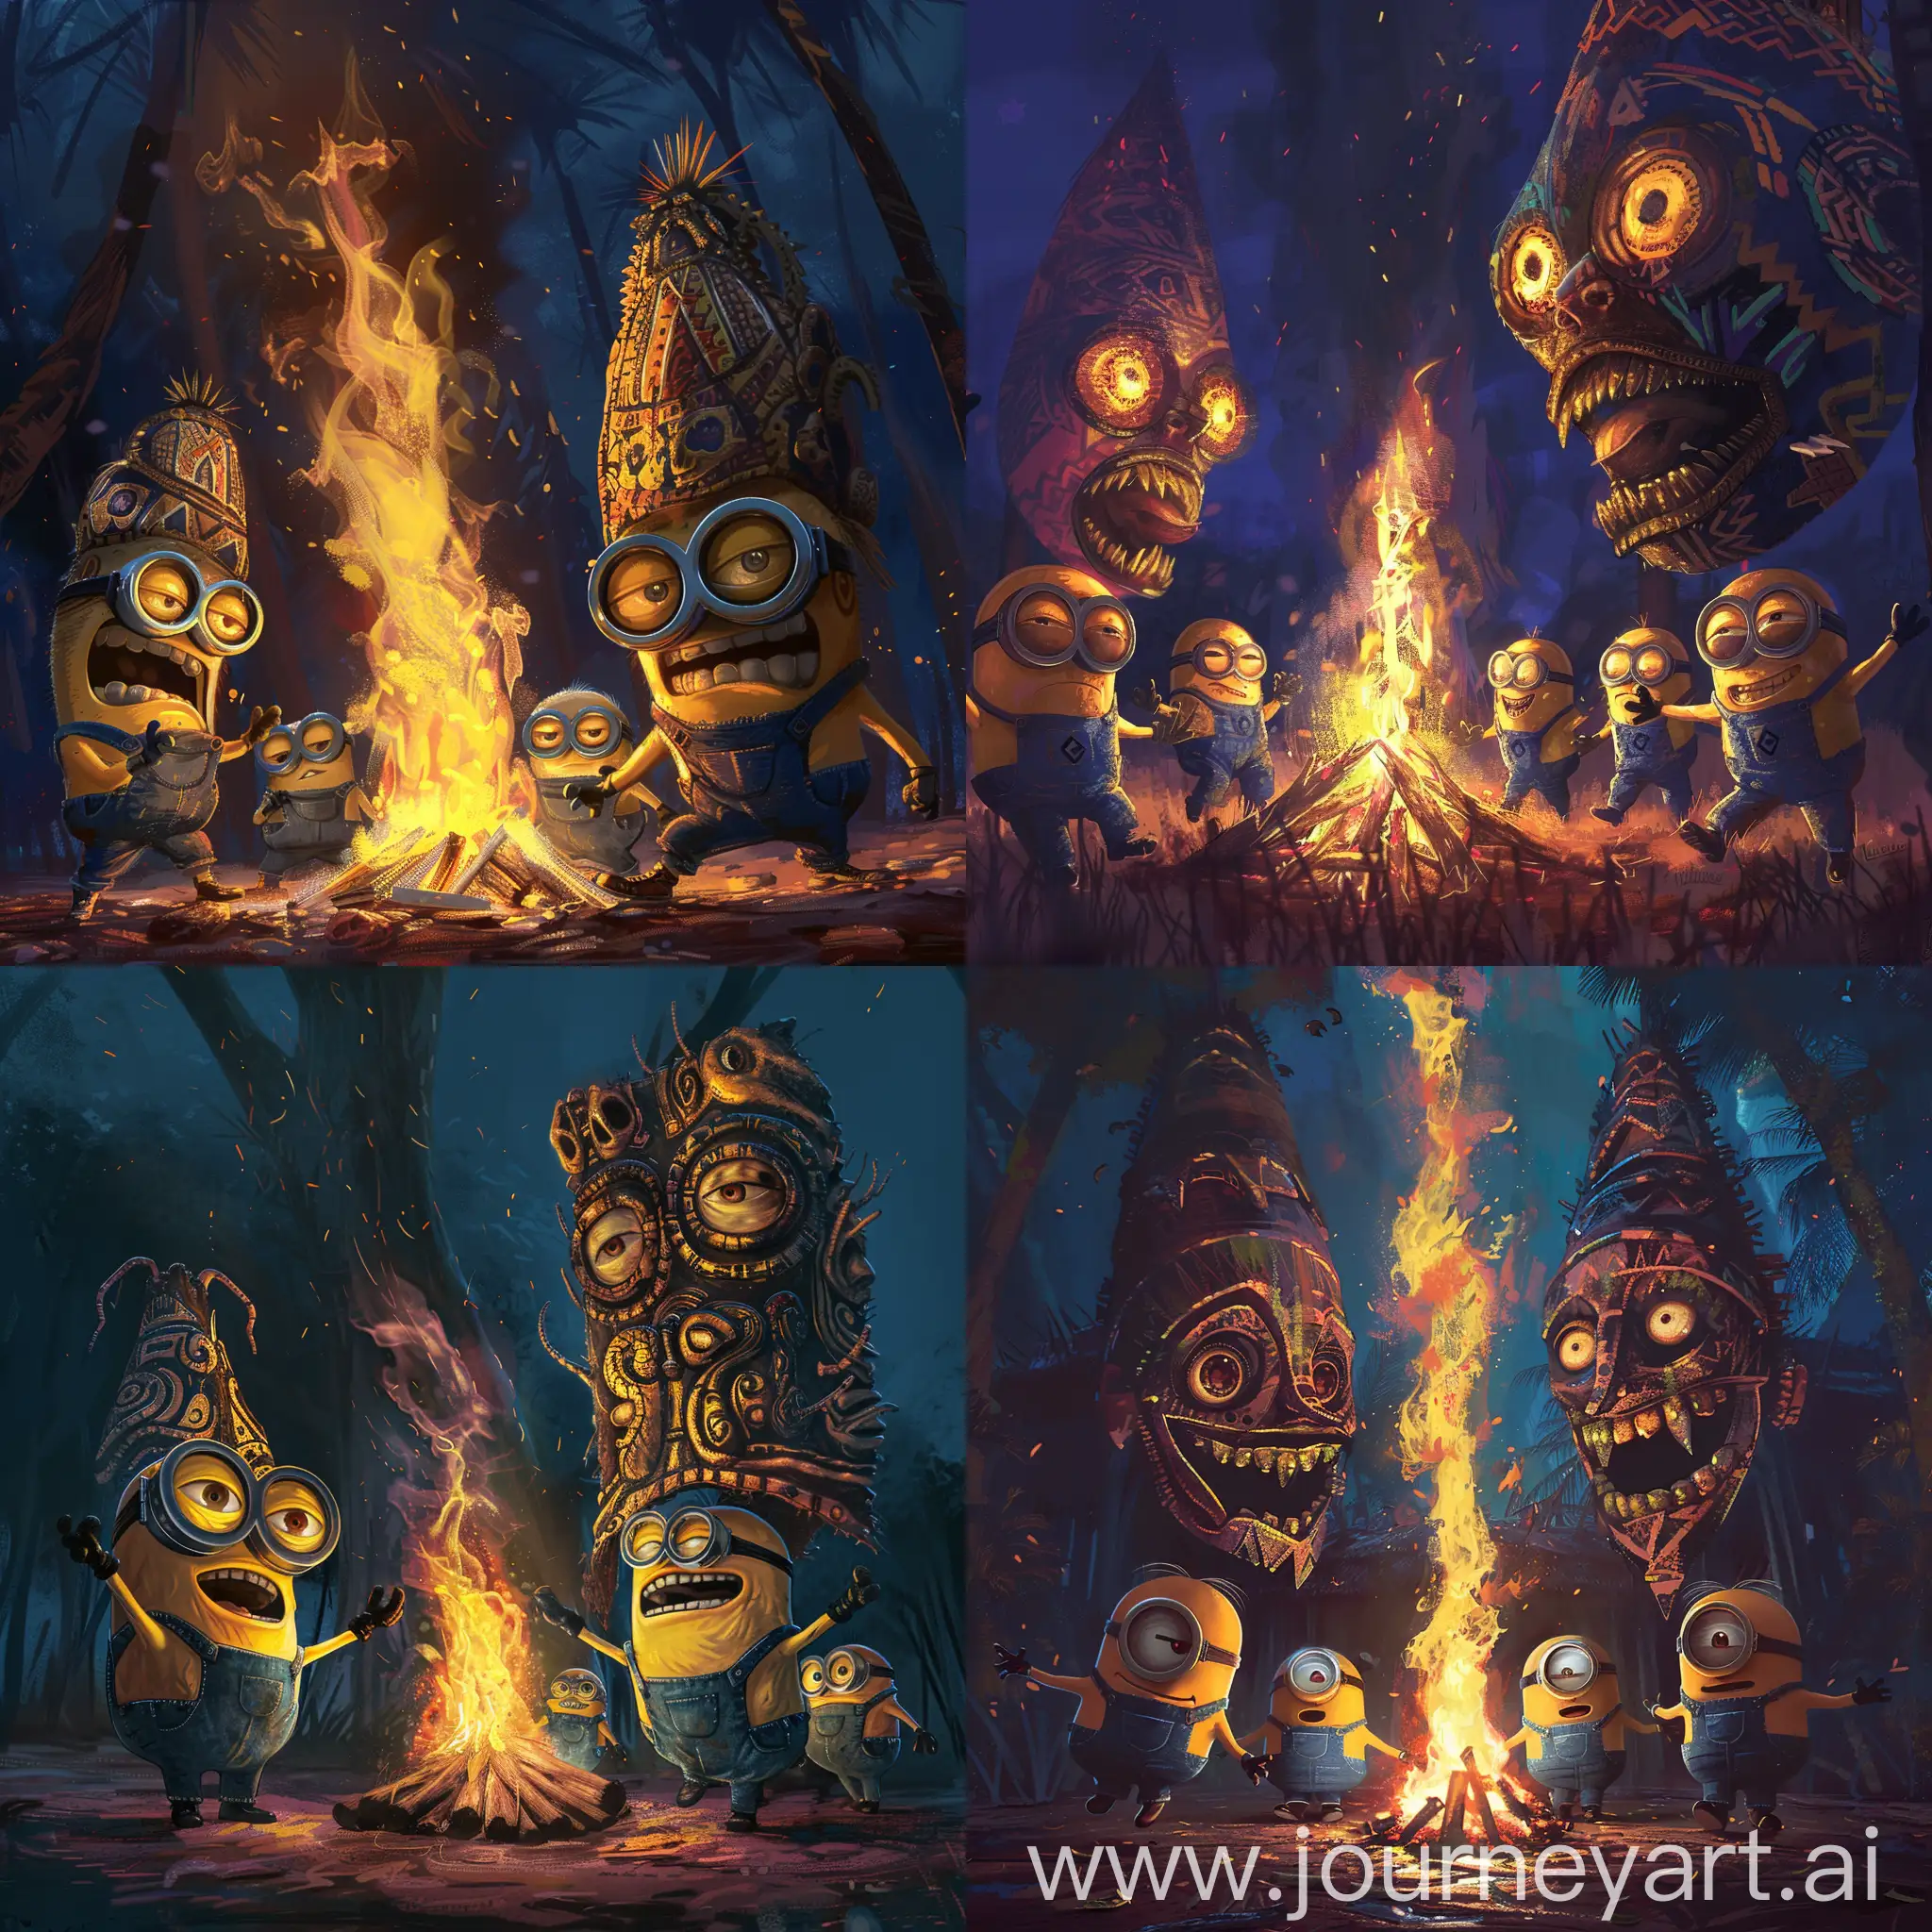 Anime-Minions-Dance-with-Mysterious-African-Masks-Around-a-Fiery-Night-Bonfire